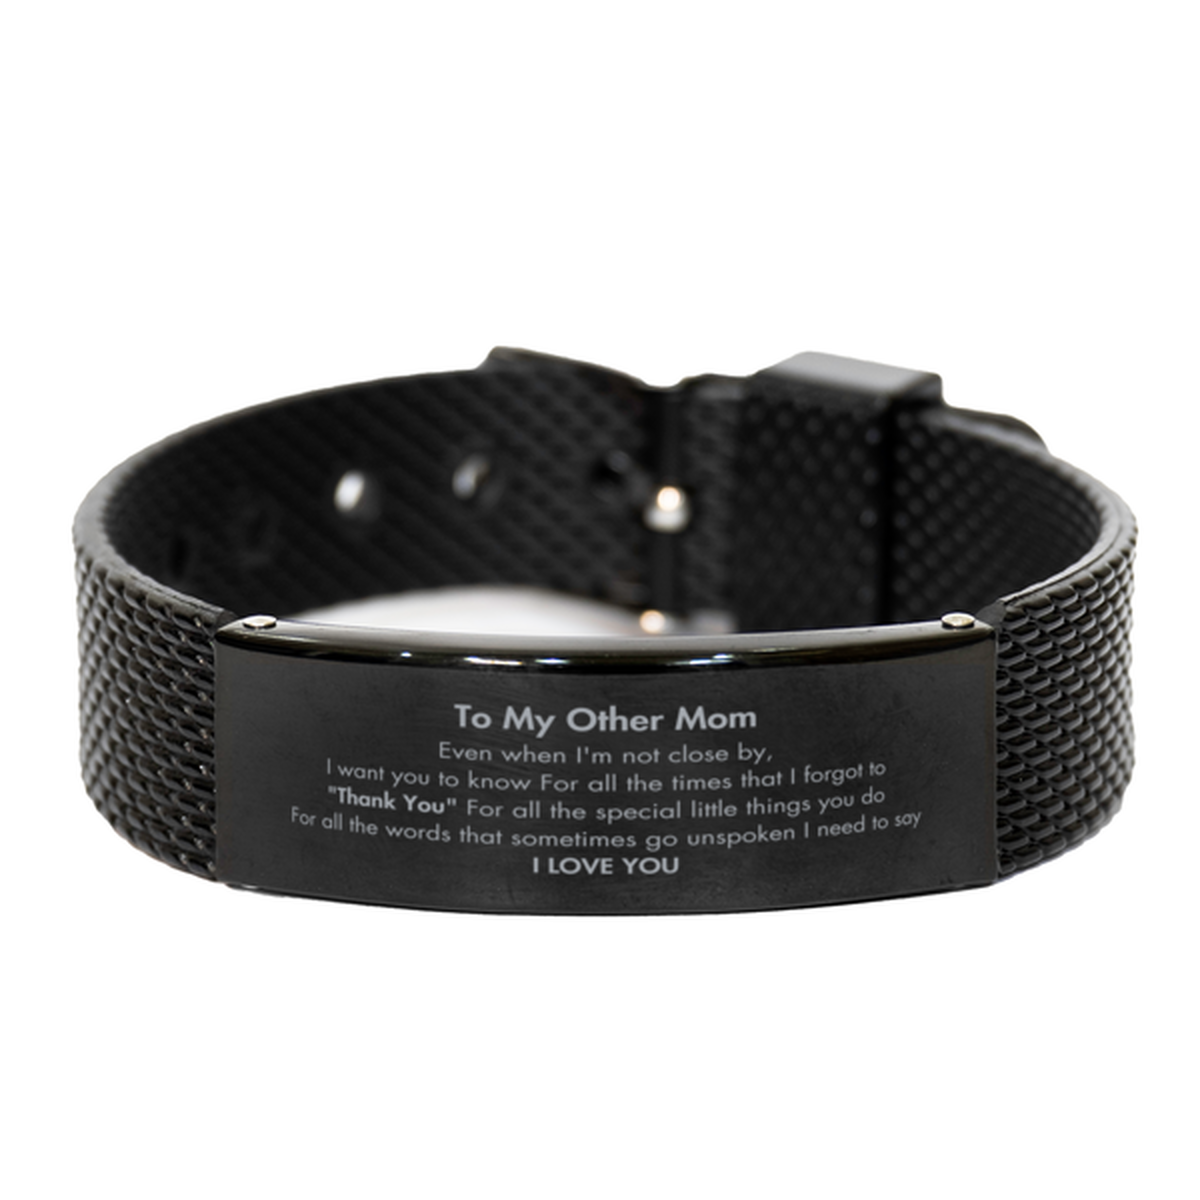 Thank You Gifts for Other Mom, Keepsake Black Shark Mesh Bracelet Gifts for Other Mom Birthday Mother's day Father's Day Other Mom For all the words That sometimes go unspoken I need to say I LOVE YOU